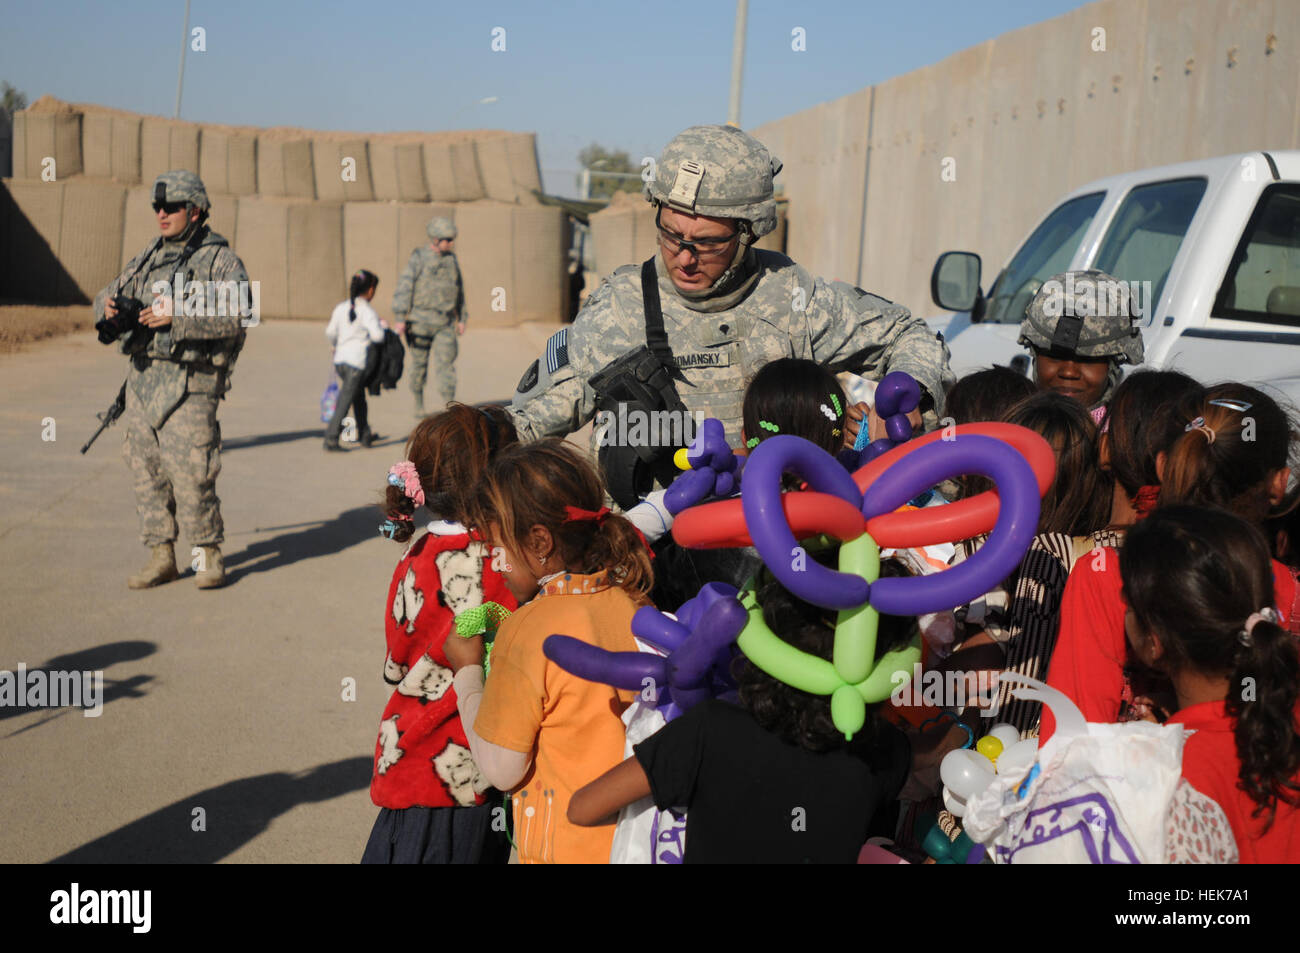 Spc. John Romansky, Combat Engineer, 229th Multiple Role Bridge Company, 36th Engineer Brigade, hands out sandals as part of 'Operation Flip Flop' to Iraqi children during Iraqi Kids Day on Joint Base Balad. Iraqi Kids Day, Operation Flip-Flop 340113 Stock Photo